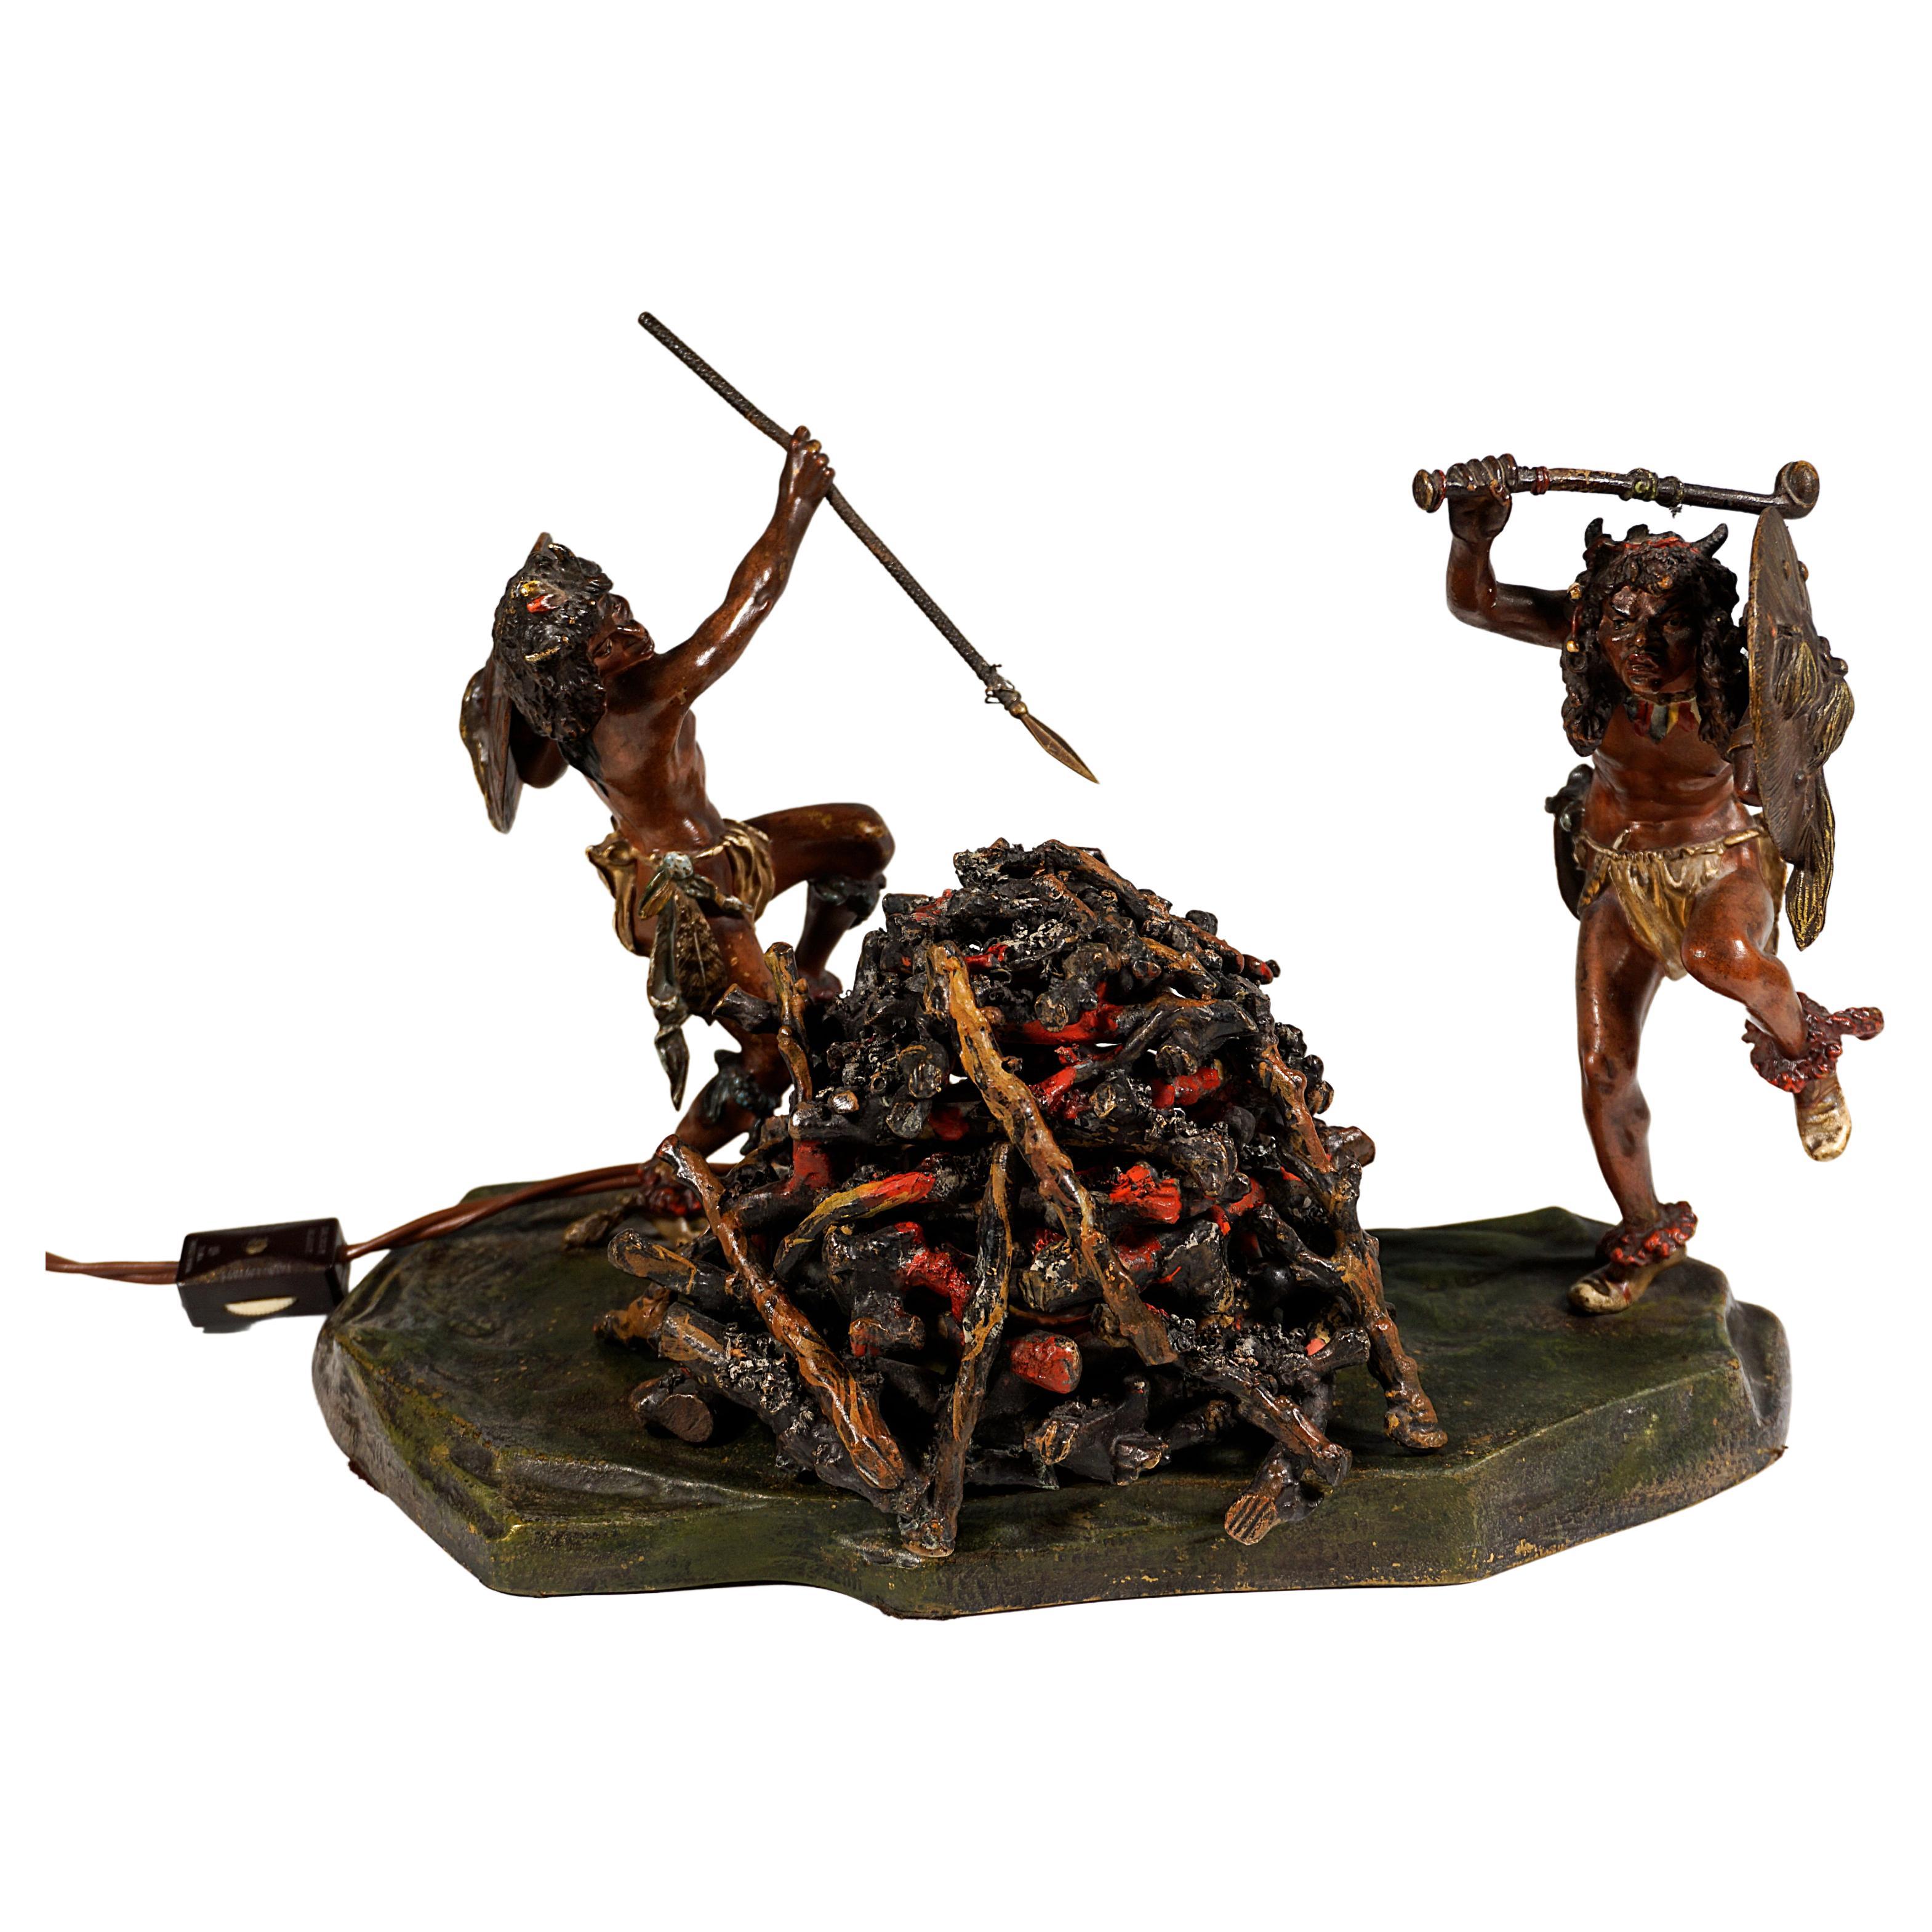 Very rare piece of Viennese bronze art:
Two barefoot Native American warriors with horned headdresses and loincloths, and feathers around the hips and legs, with shields affixed to the forearms and weapons raised, dancing around a campfire.
On a